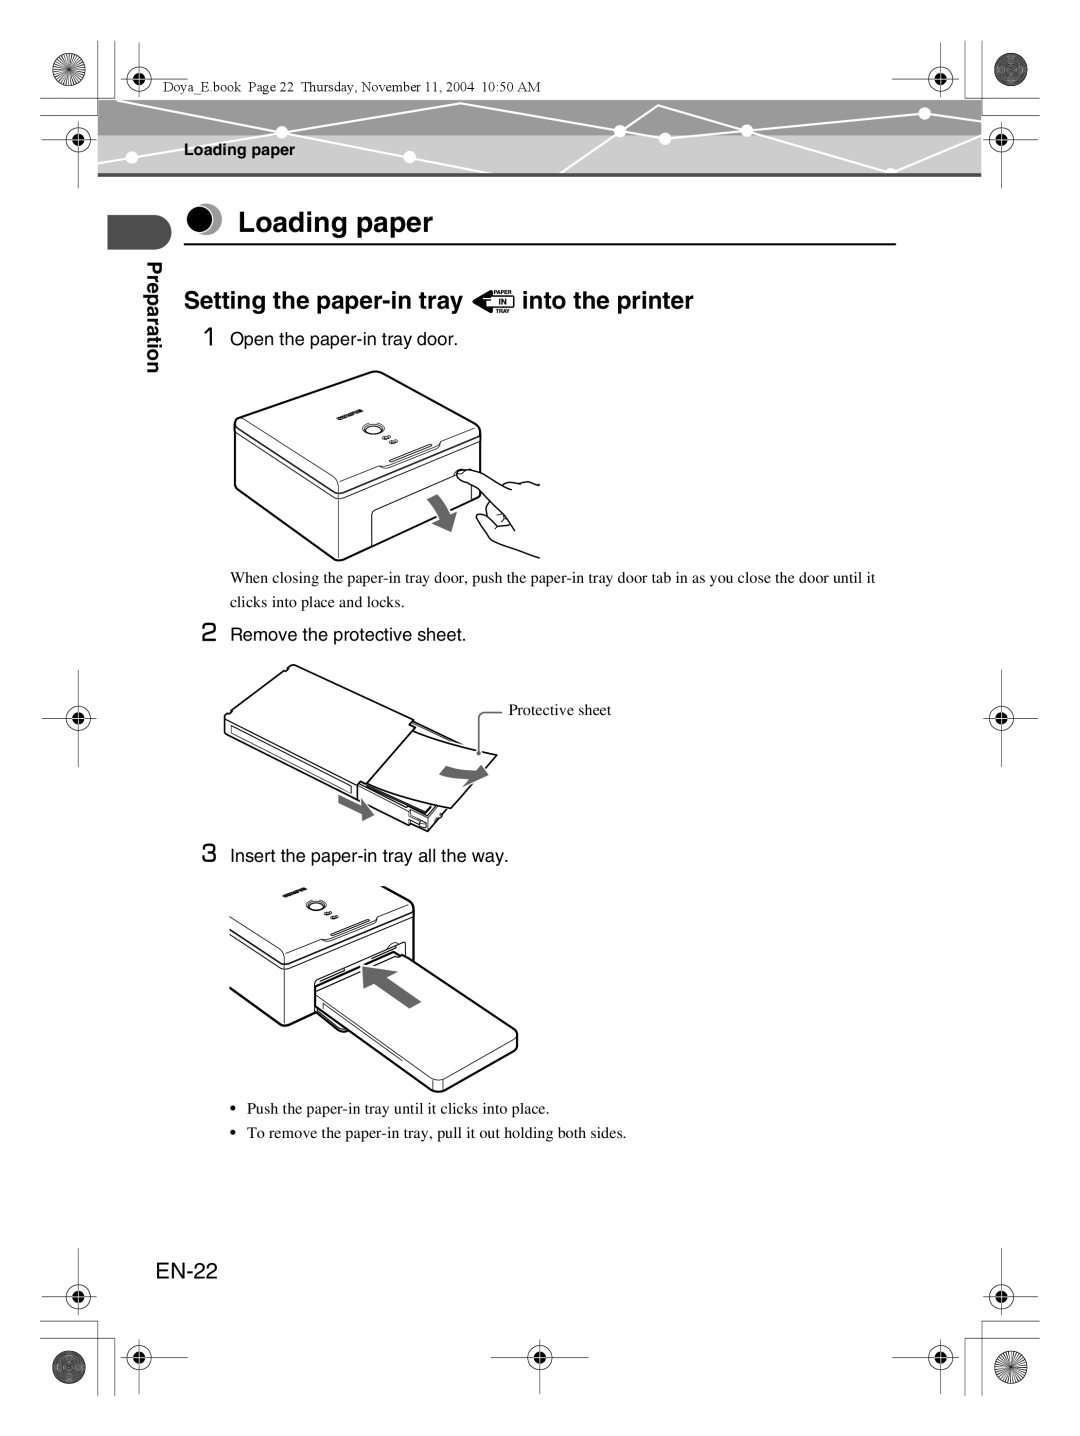 Olympus P-S100 user manual Loading paper, Setting the paper-in tray into the printer, EN-22, Preparation 